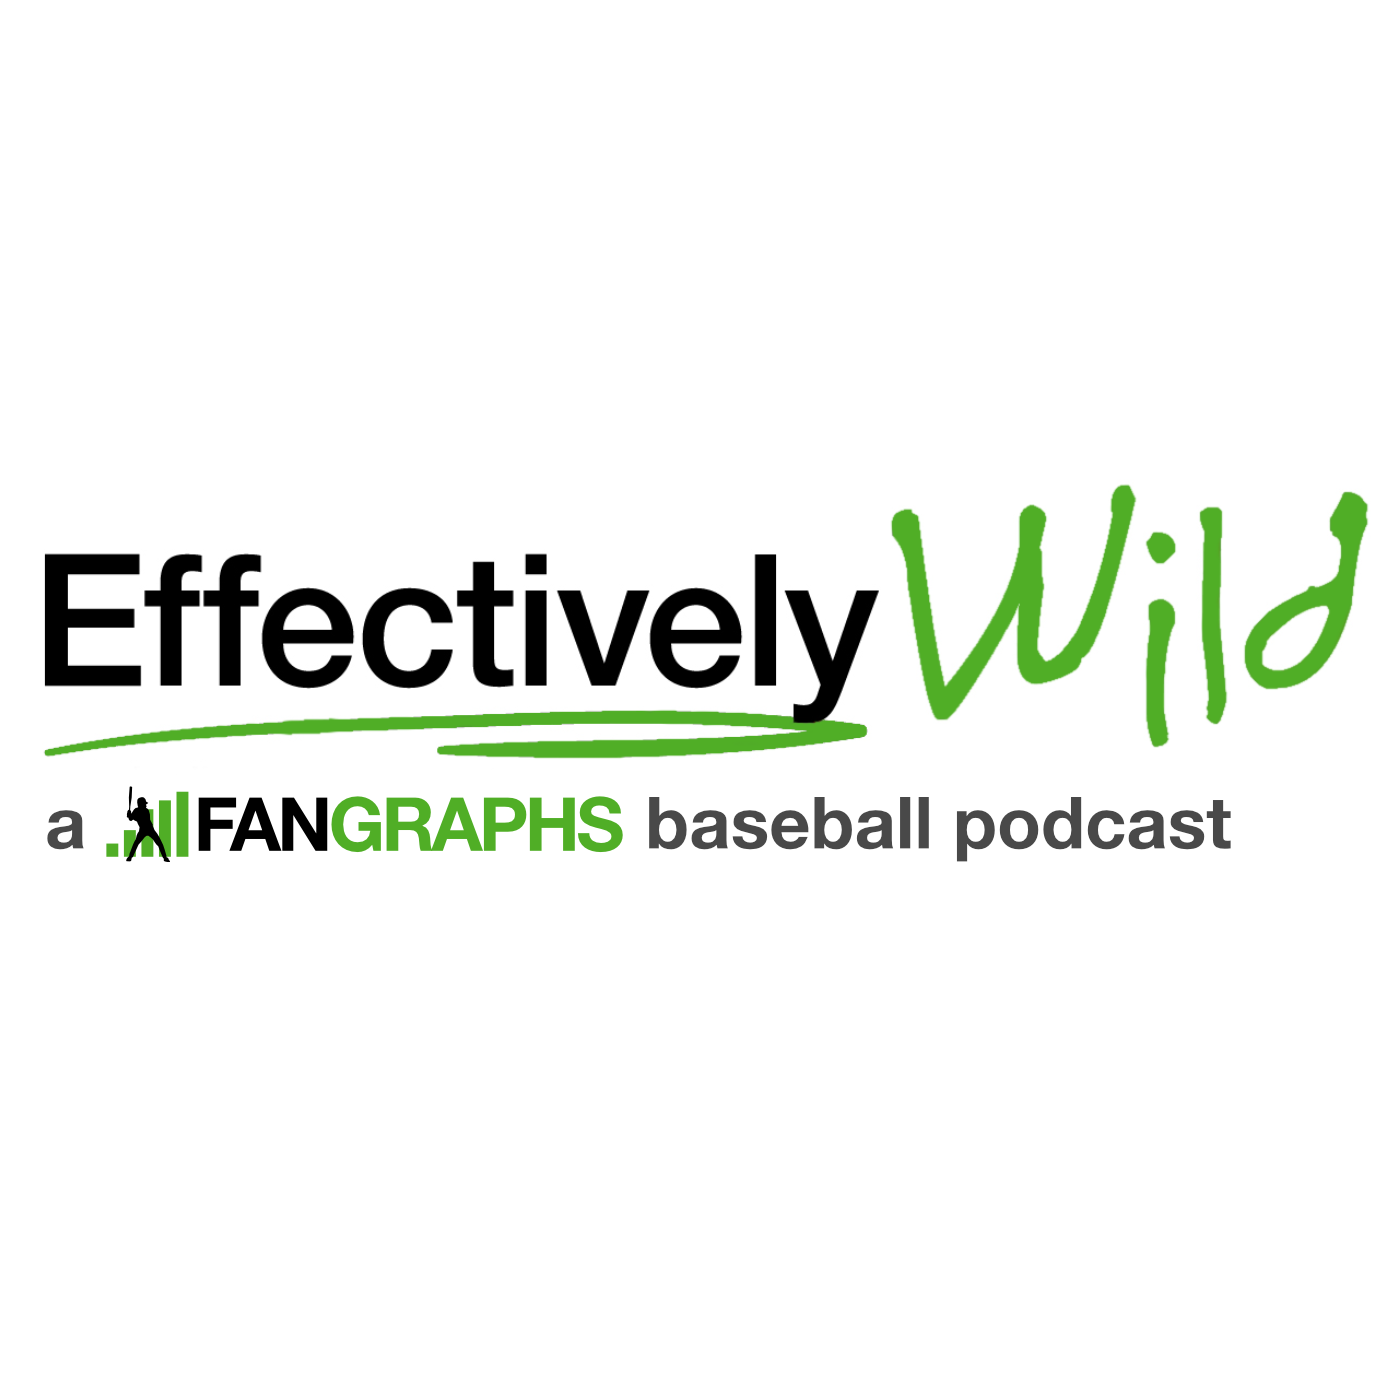 A highlight from Effectively Wild Episode 1881: Antitrust Us